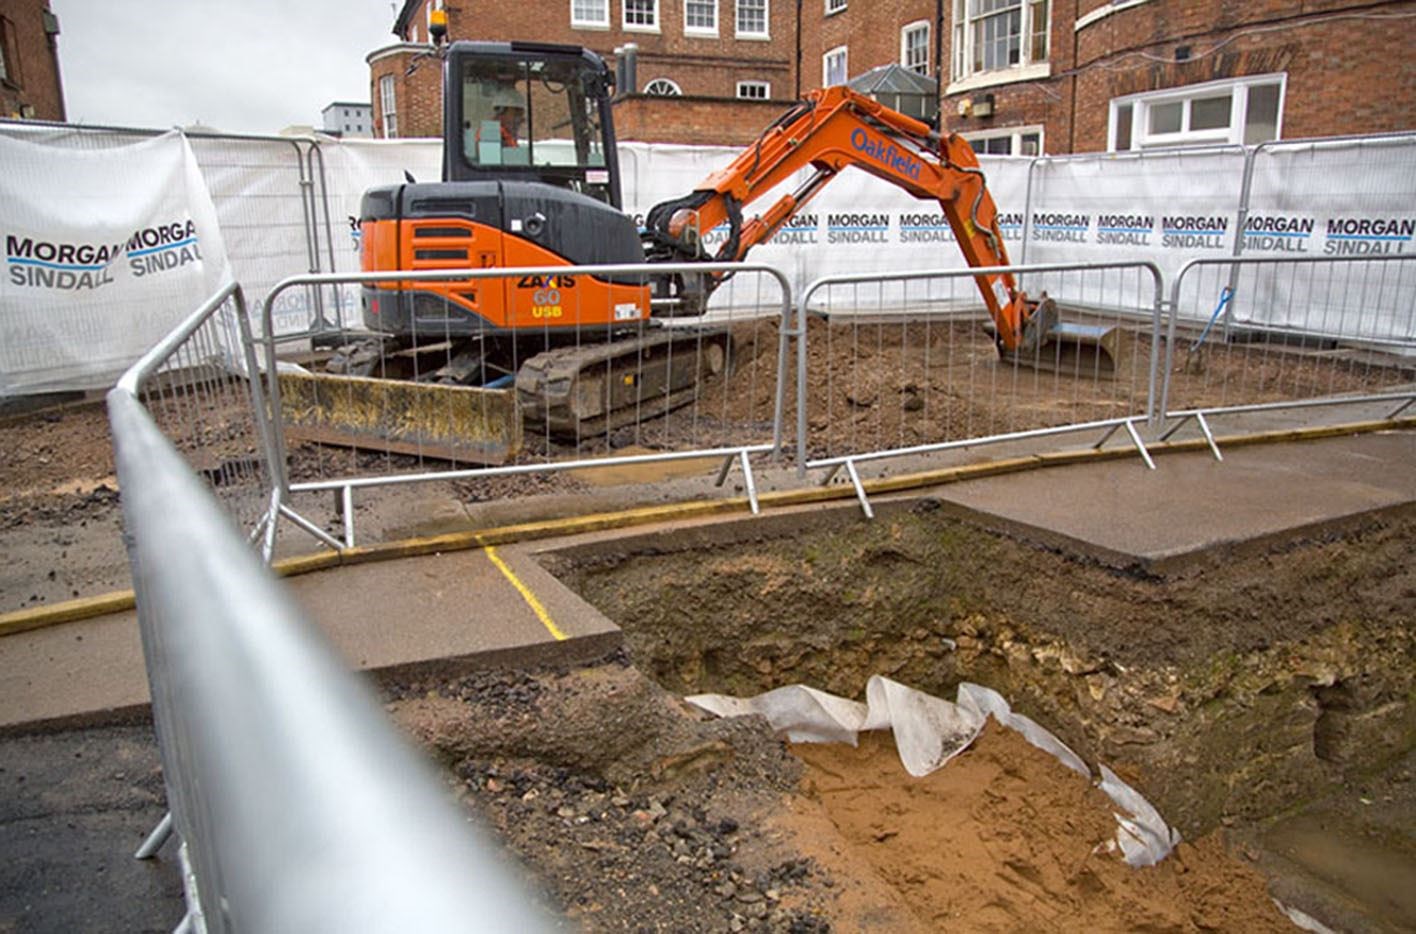 The dig to find Richard III’s final resting place was led by the University of Leicester (University of Leicester/PA)